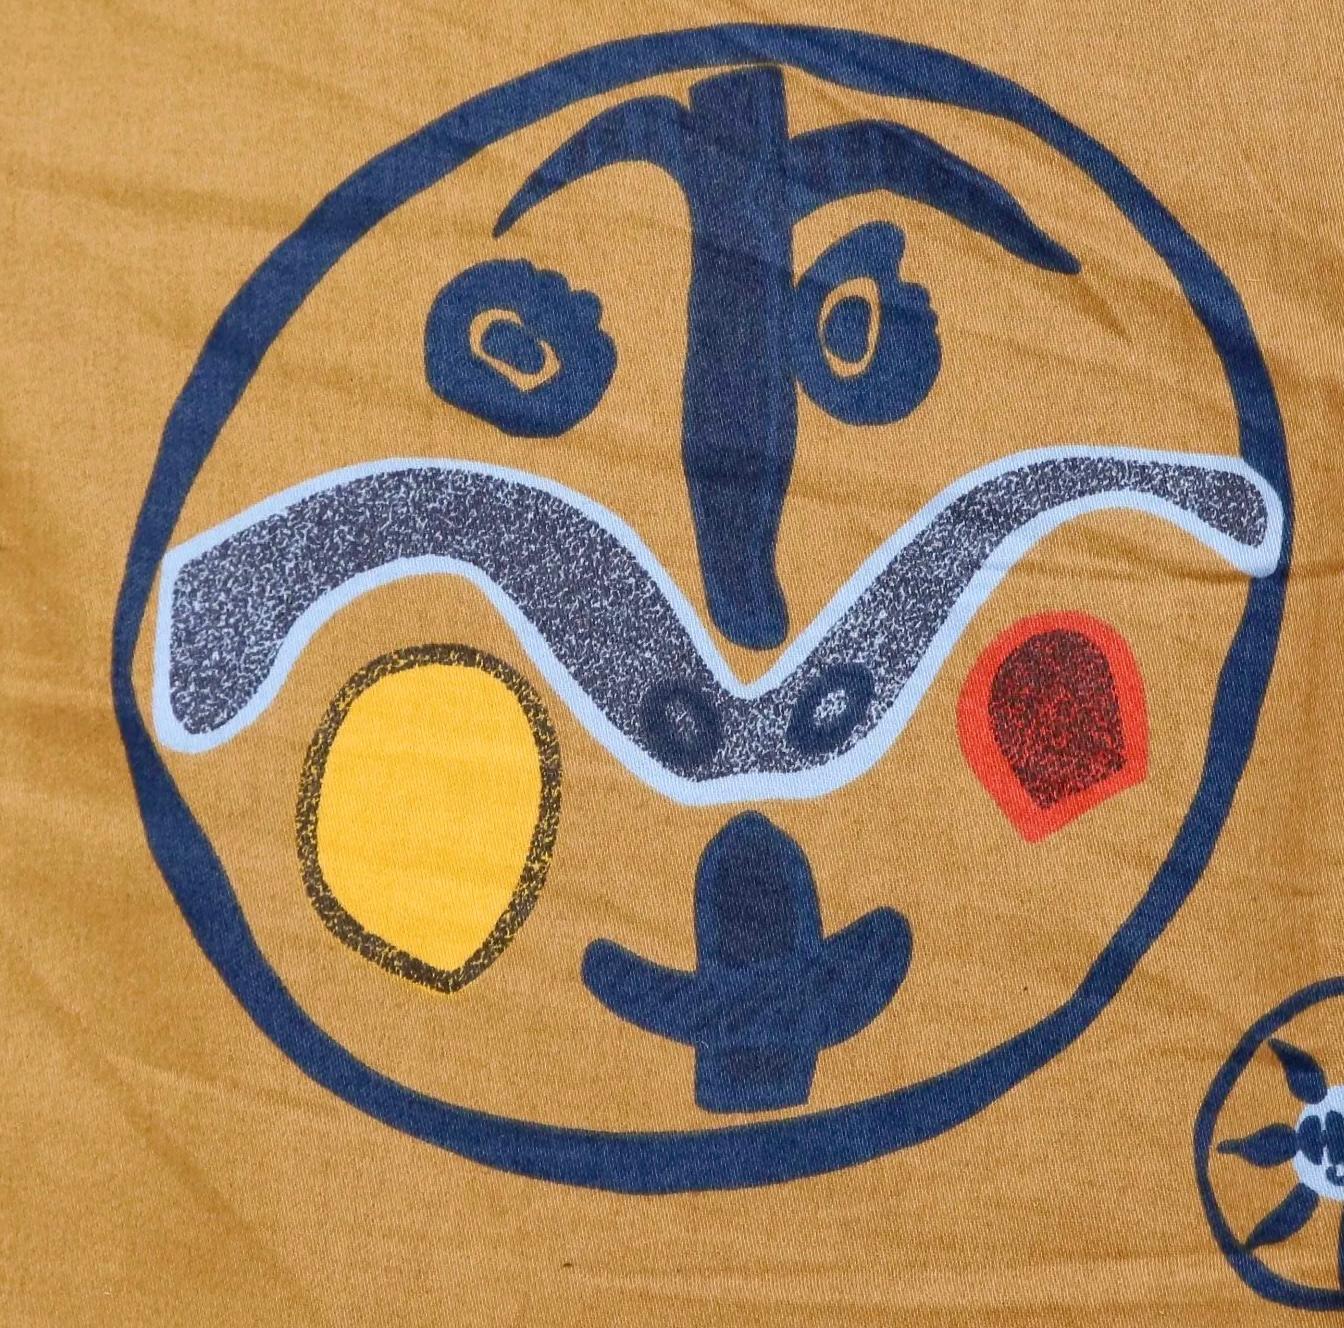 English Pablo Picasso, Carolyn Winters, Café Picasso Modern Textile, England, UK, 1970s